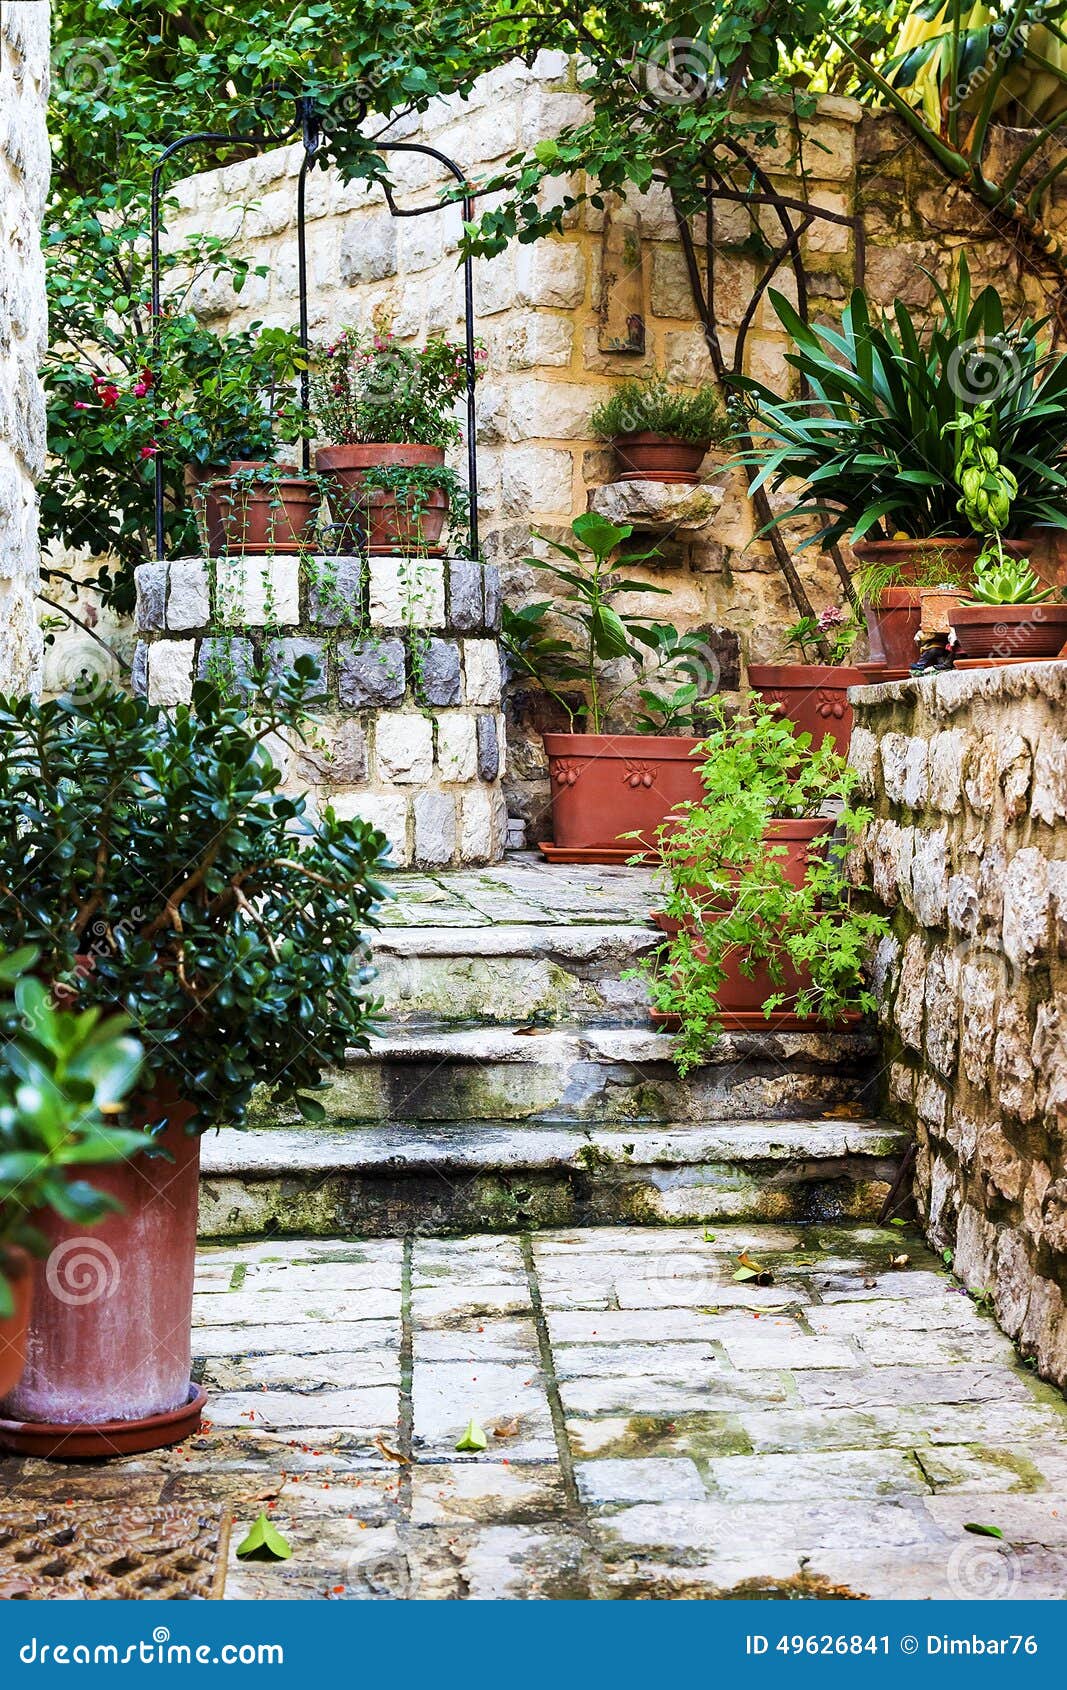 The Medieval Courtyard with Flowers Stock Image - Image of garden